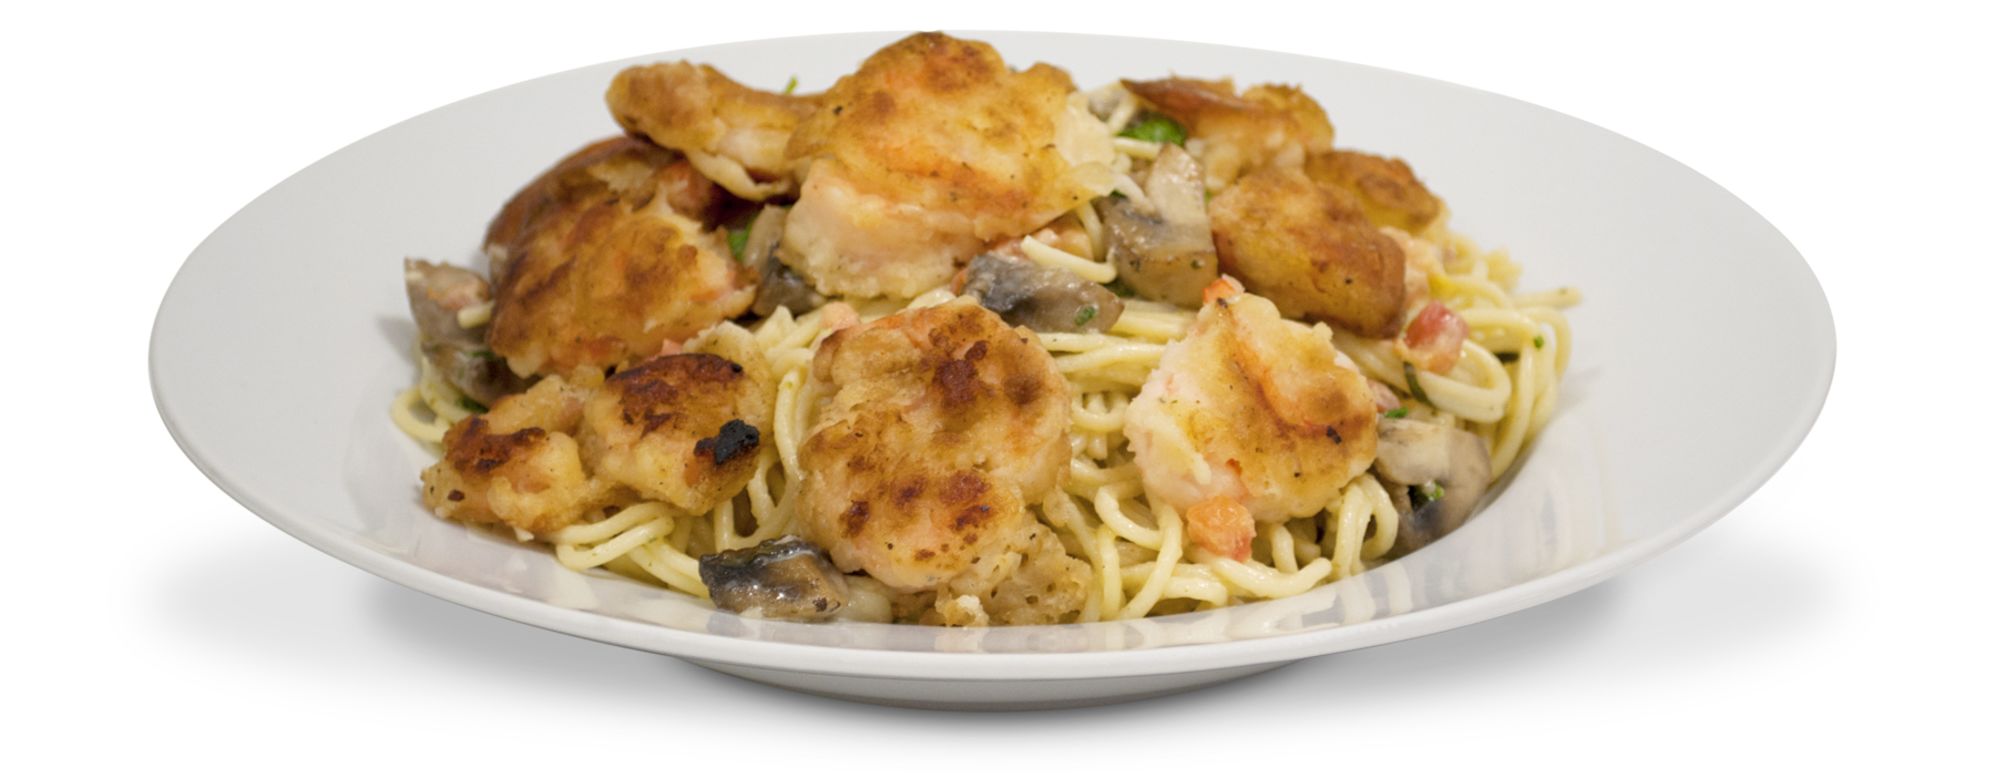 The Cheesecake Factory's bistro shrimp pasta has more calories than any other entree on the restaurant's menu. It totals 3,120 calories, 89 grams of saturated fat and 1,090 milligrams of sodium, according to the Center for Science in the Public Interest.